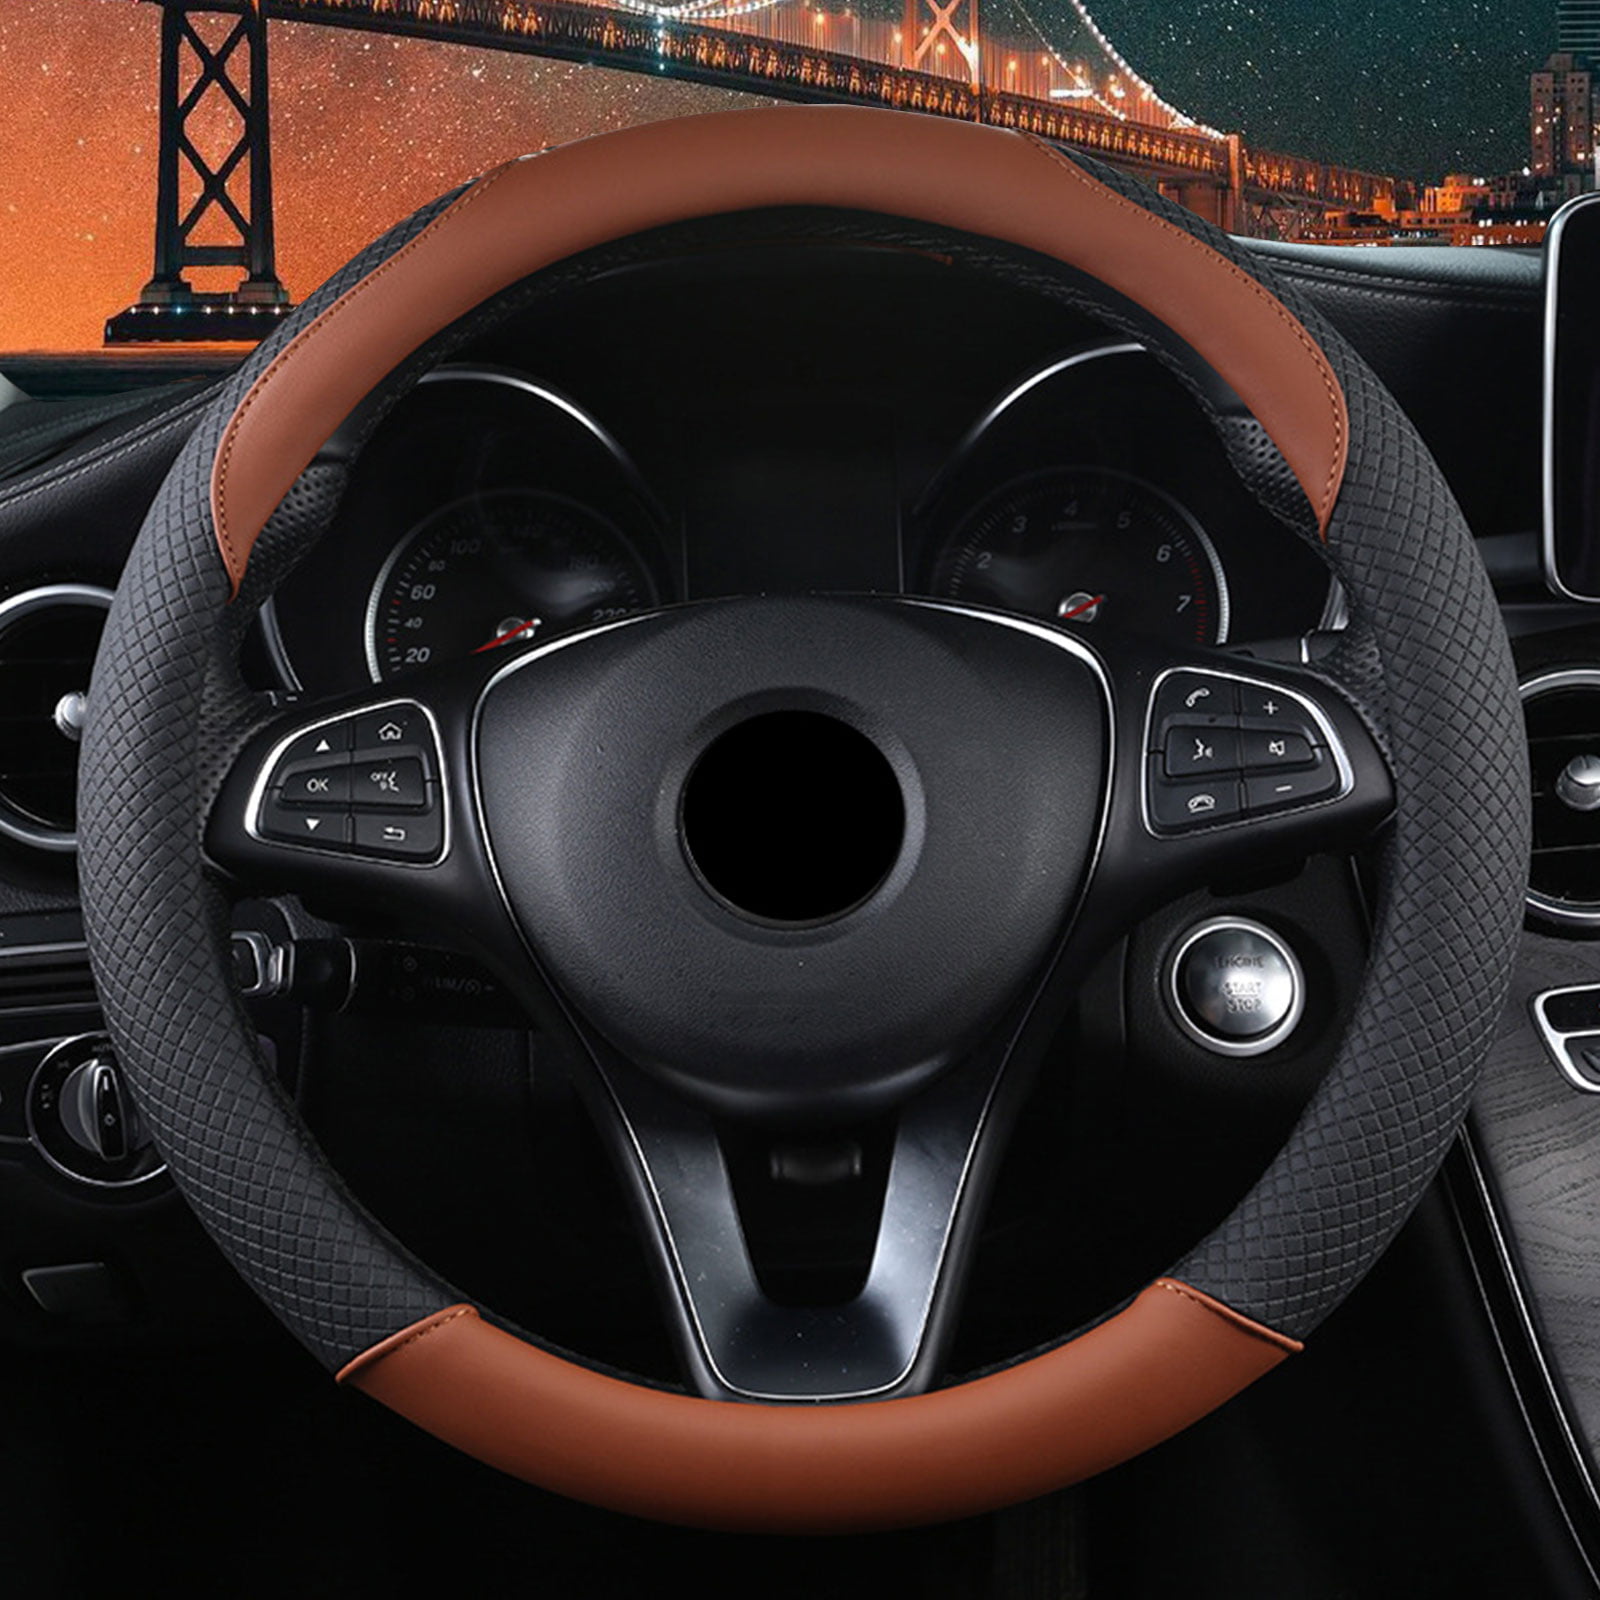 with Nice Package Anti-Slip,Comfortable Touch NICEASY Universal 15 inch Black Leather Steering Wheel Cover